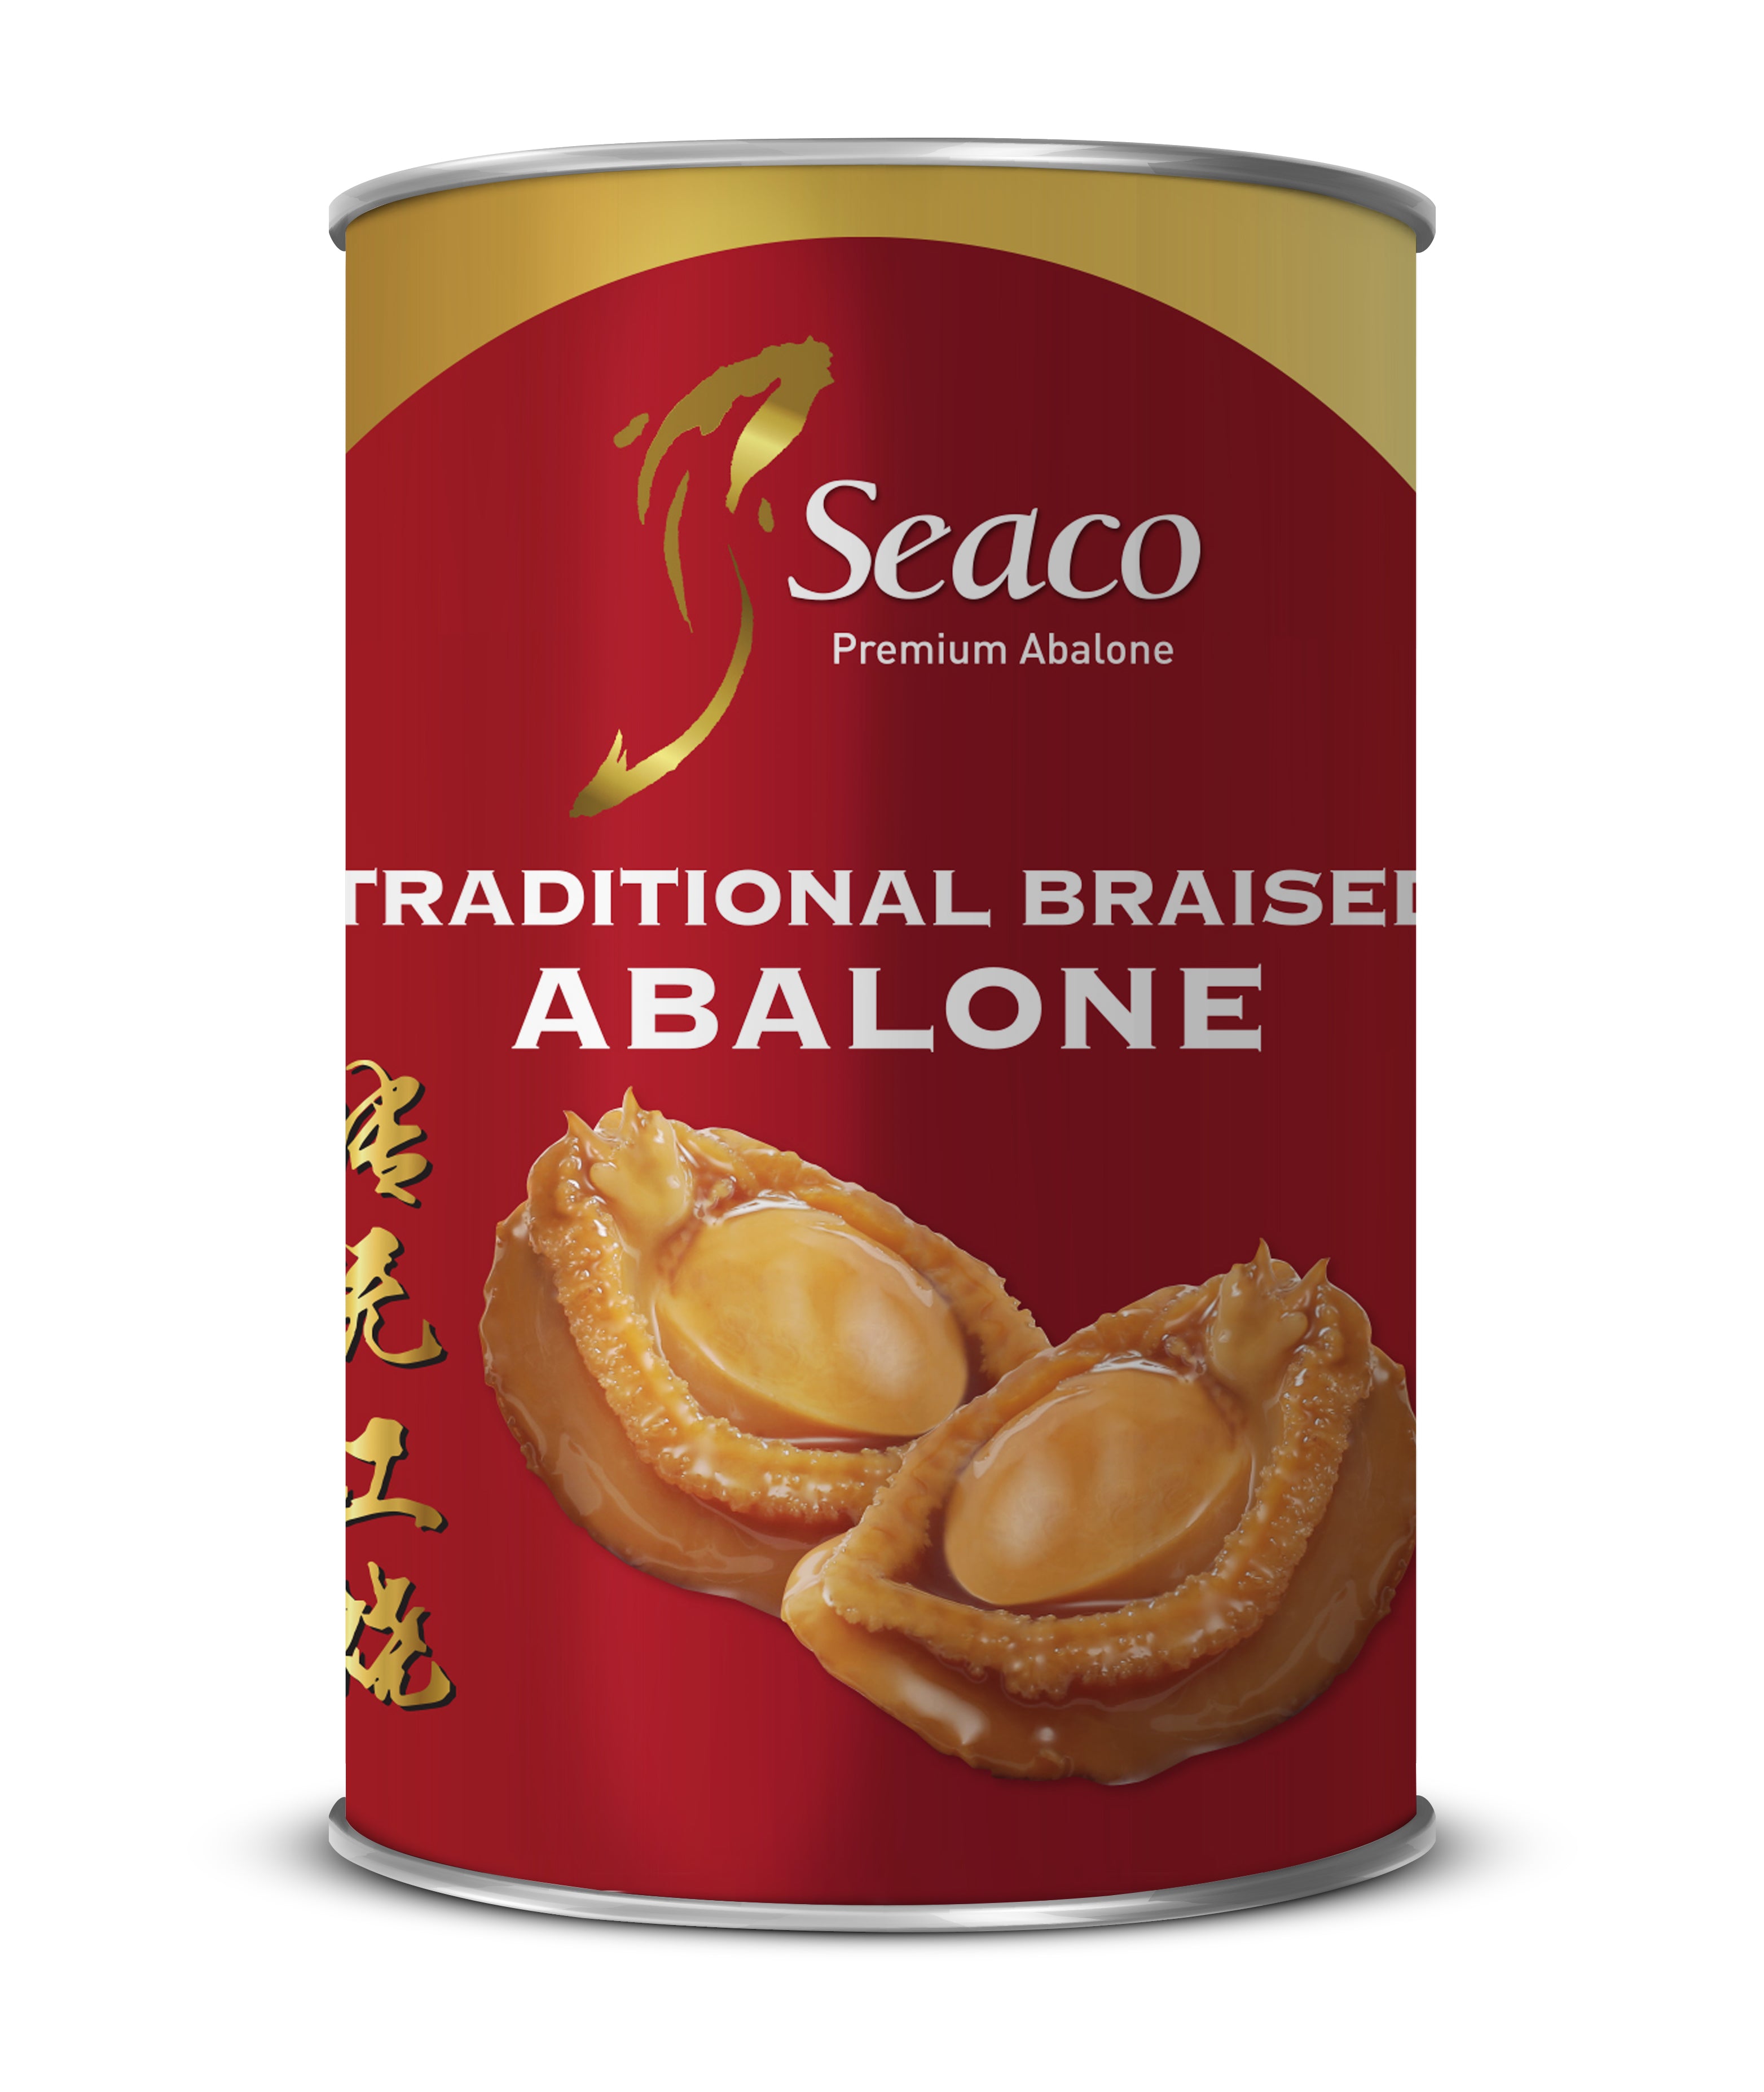 Taste of Home (Korean Abalone with Ginseng + Traditional Braised Abalone)